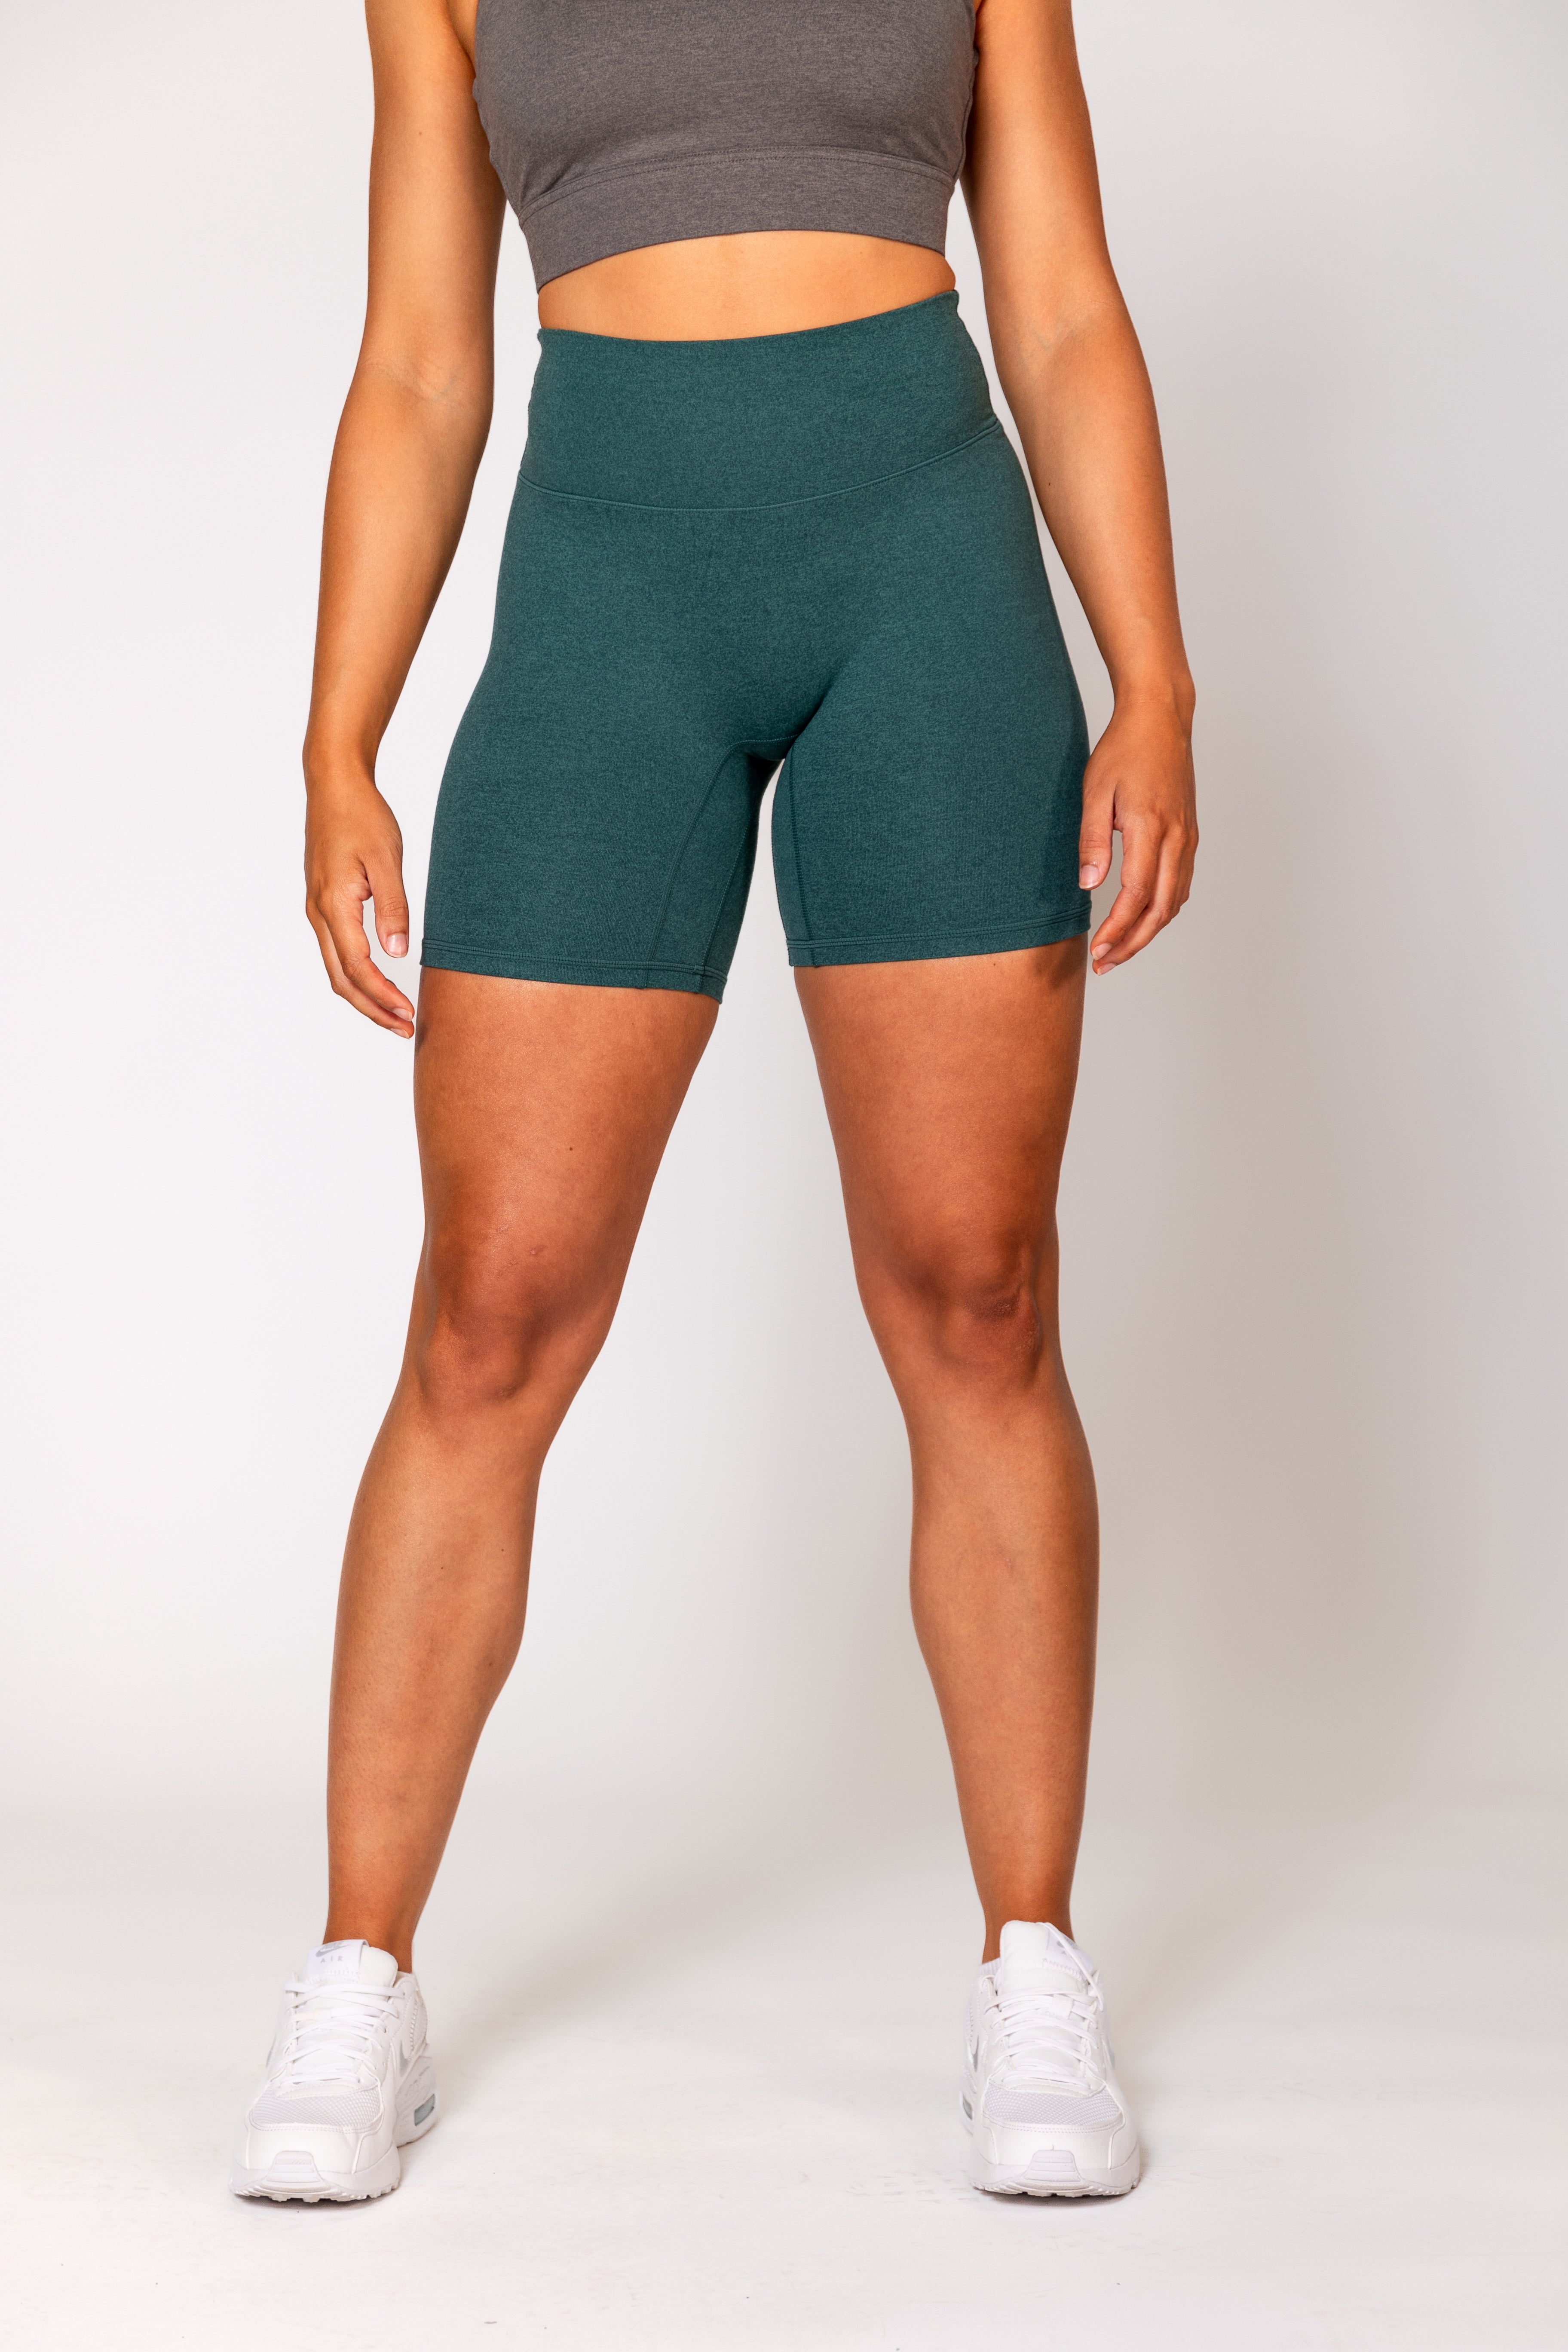 The Bare Pro Short : 6 in 2023  Lounge wear, Breathable fabric, Bare